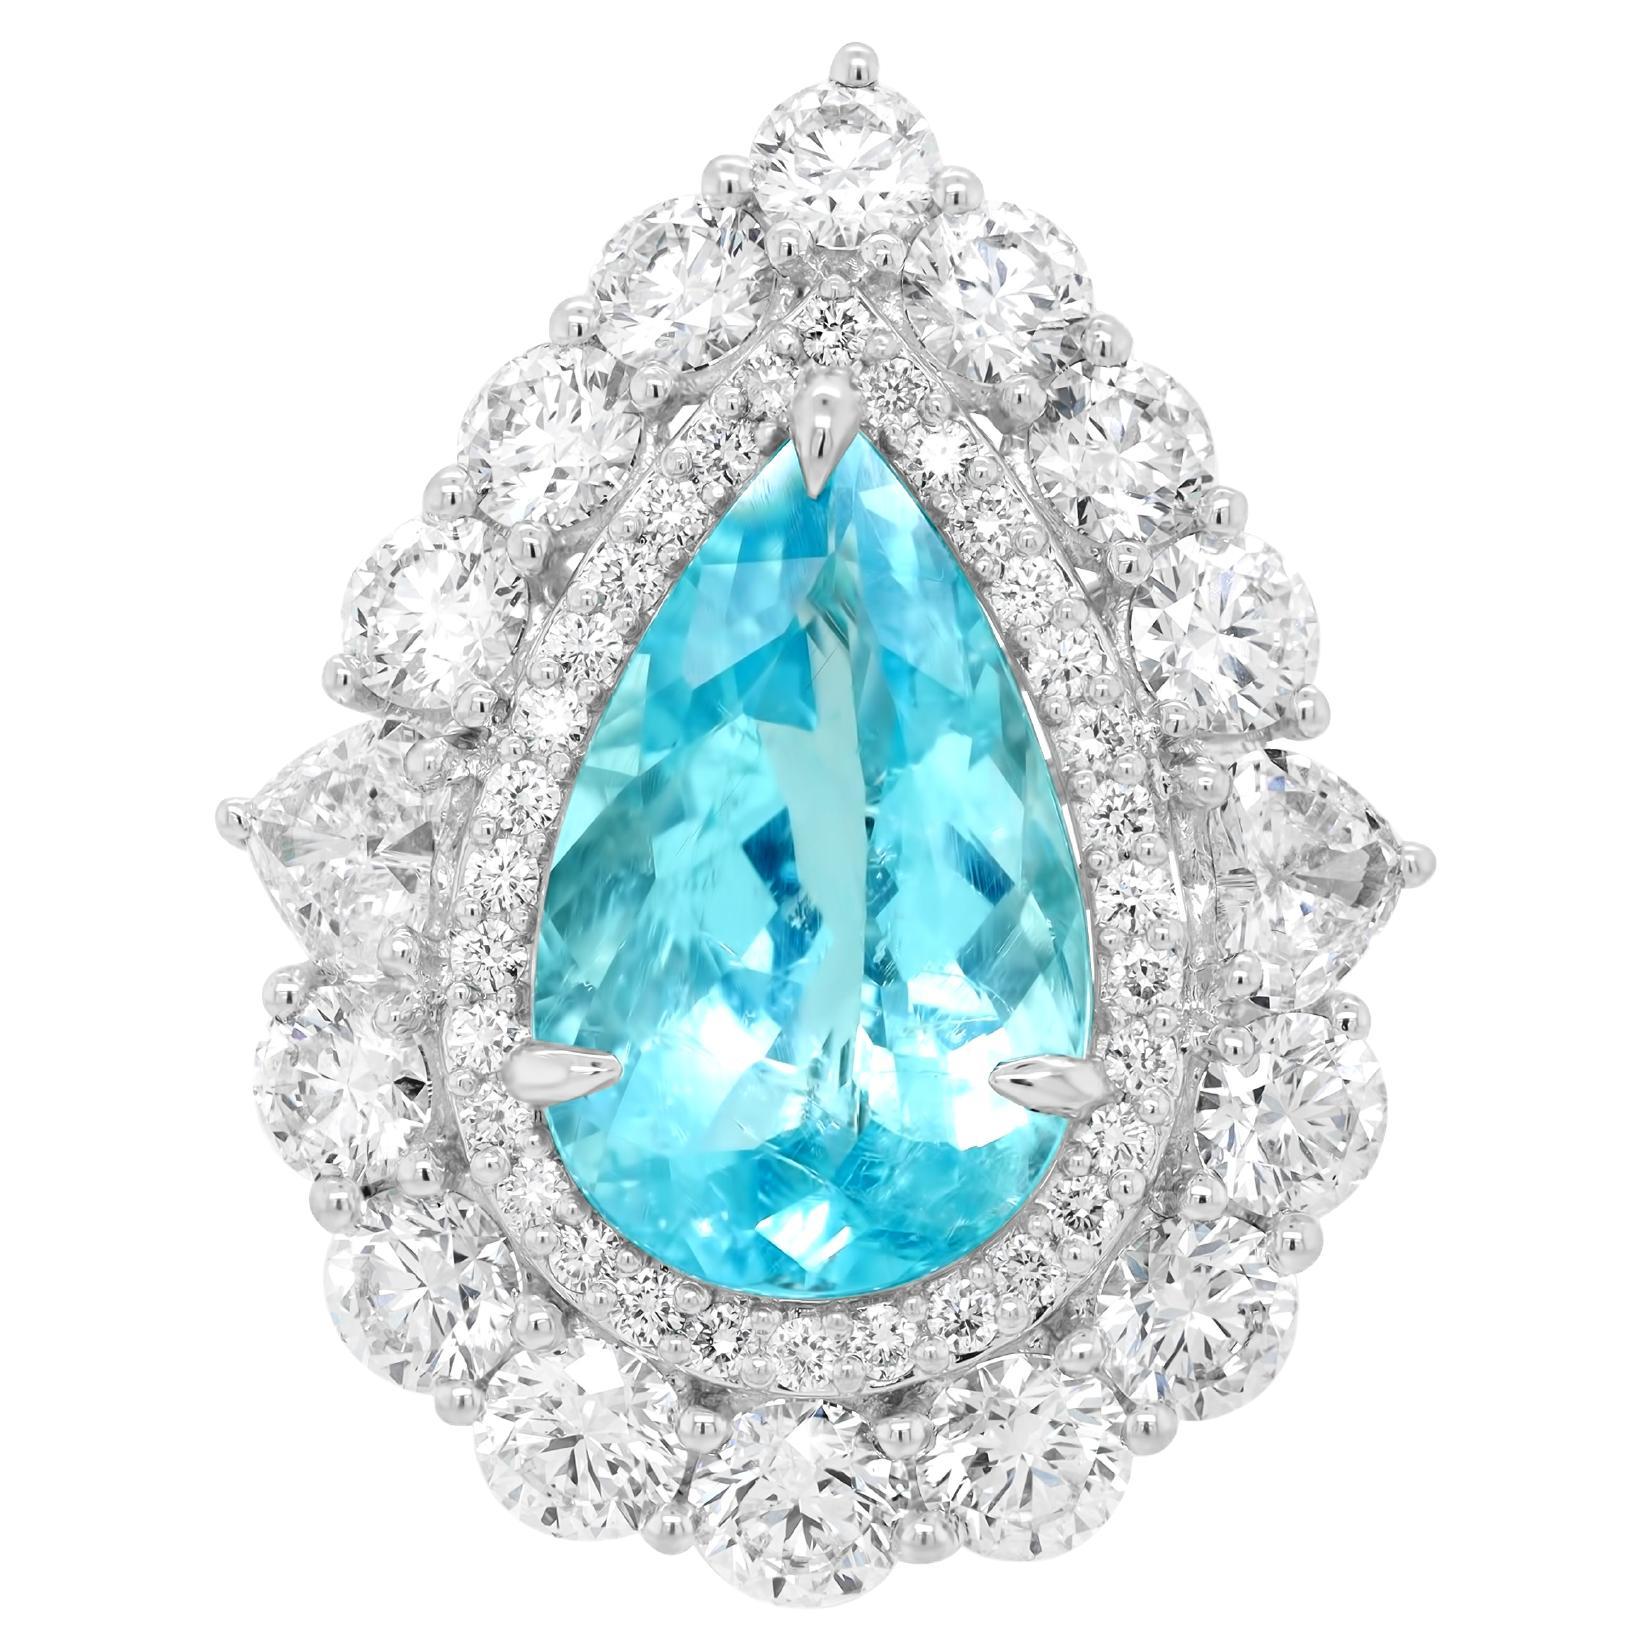 Diana M. Platinum Paraiba pendant and diamond ring (two-in-one) featuring  For Sale